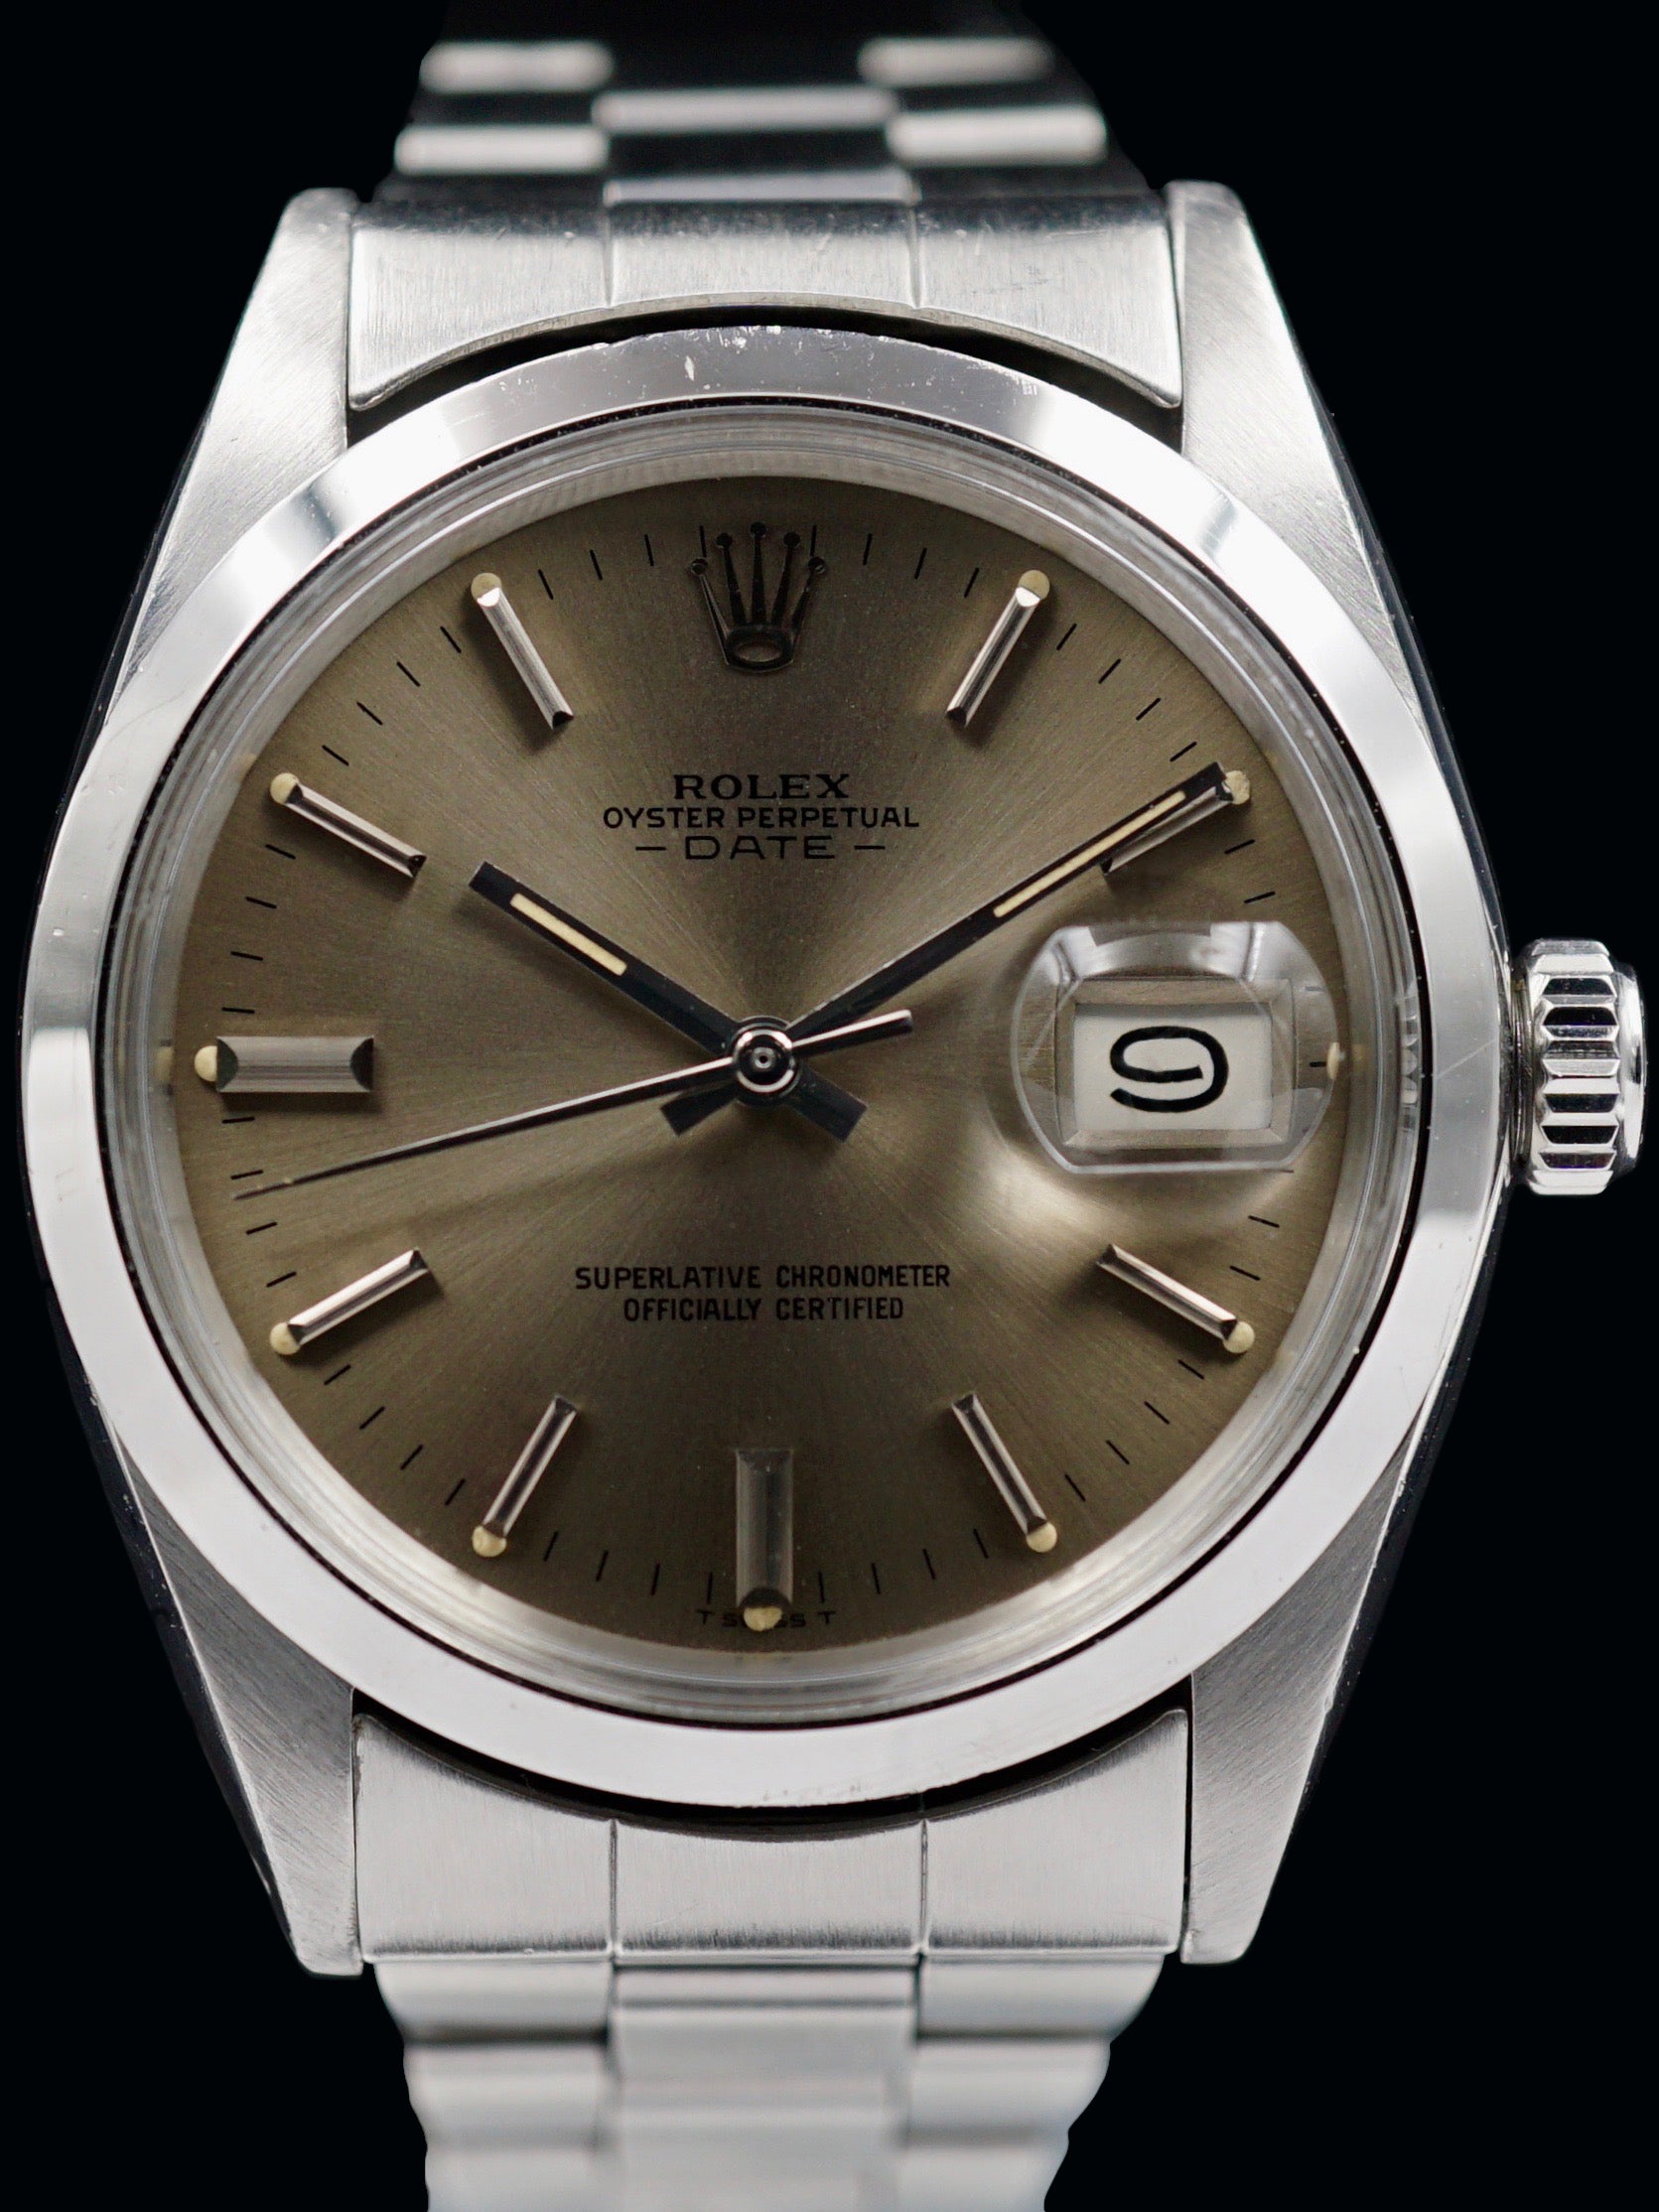 1970 Rolex Oyster Perpetual Date (Ref. 1500) "Grey Dial"